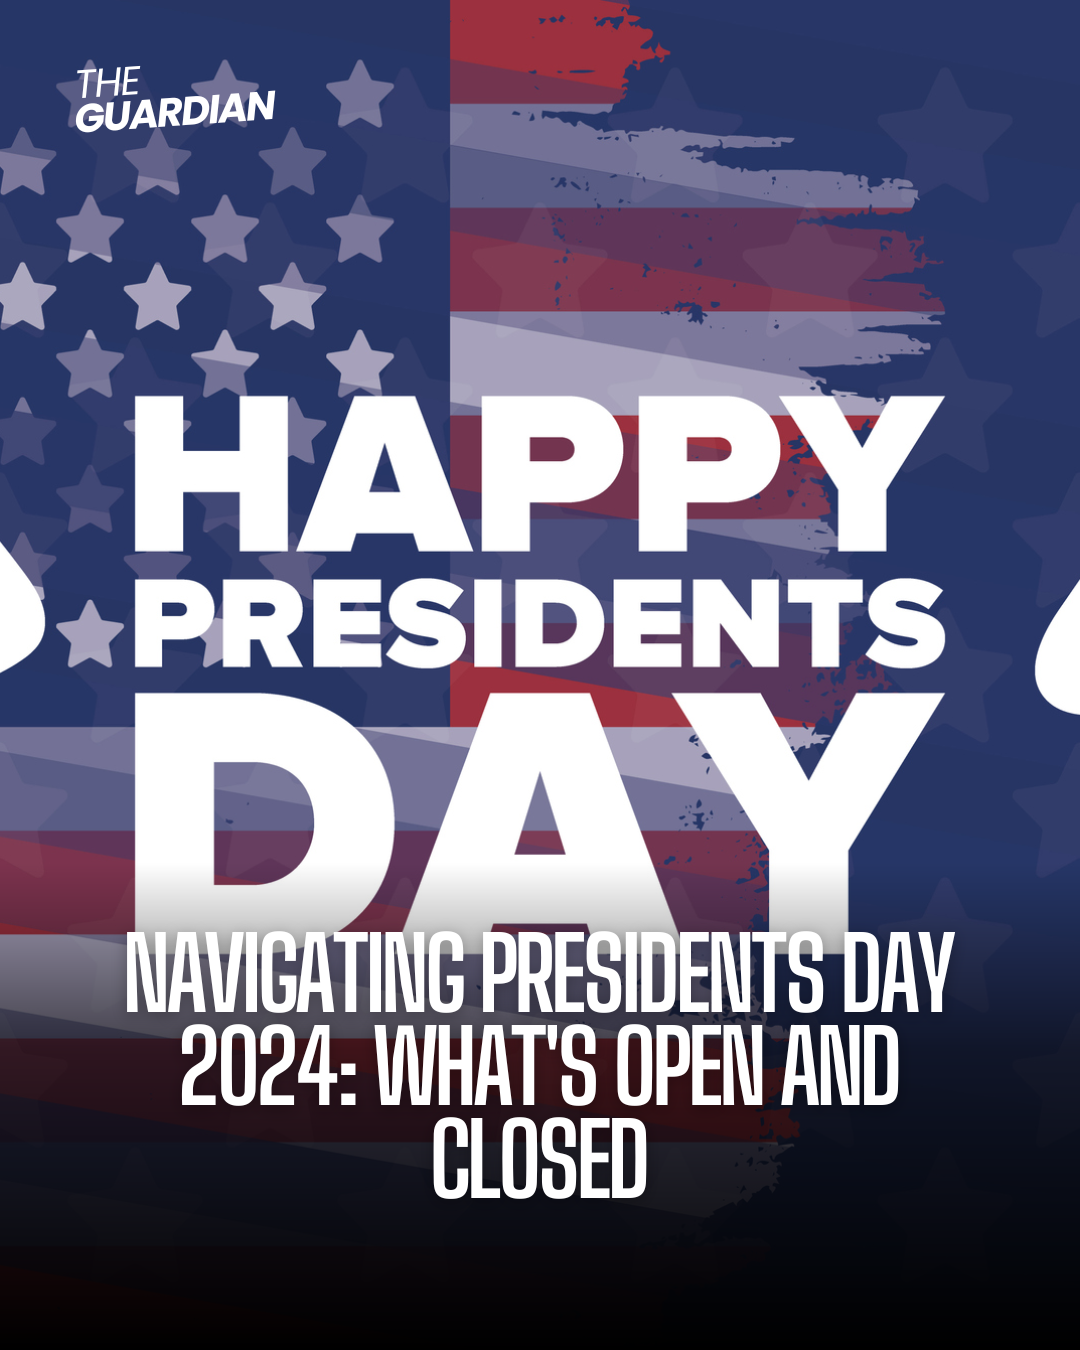 As Presidents Day approaches, many Americans anticipate a day off from work to honour the legacy of previous US presidents.